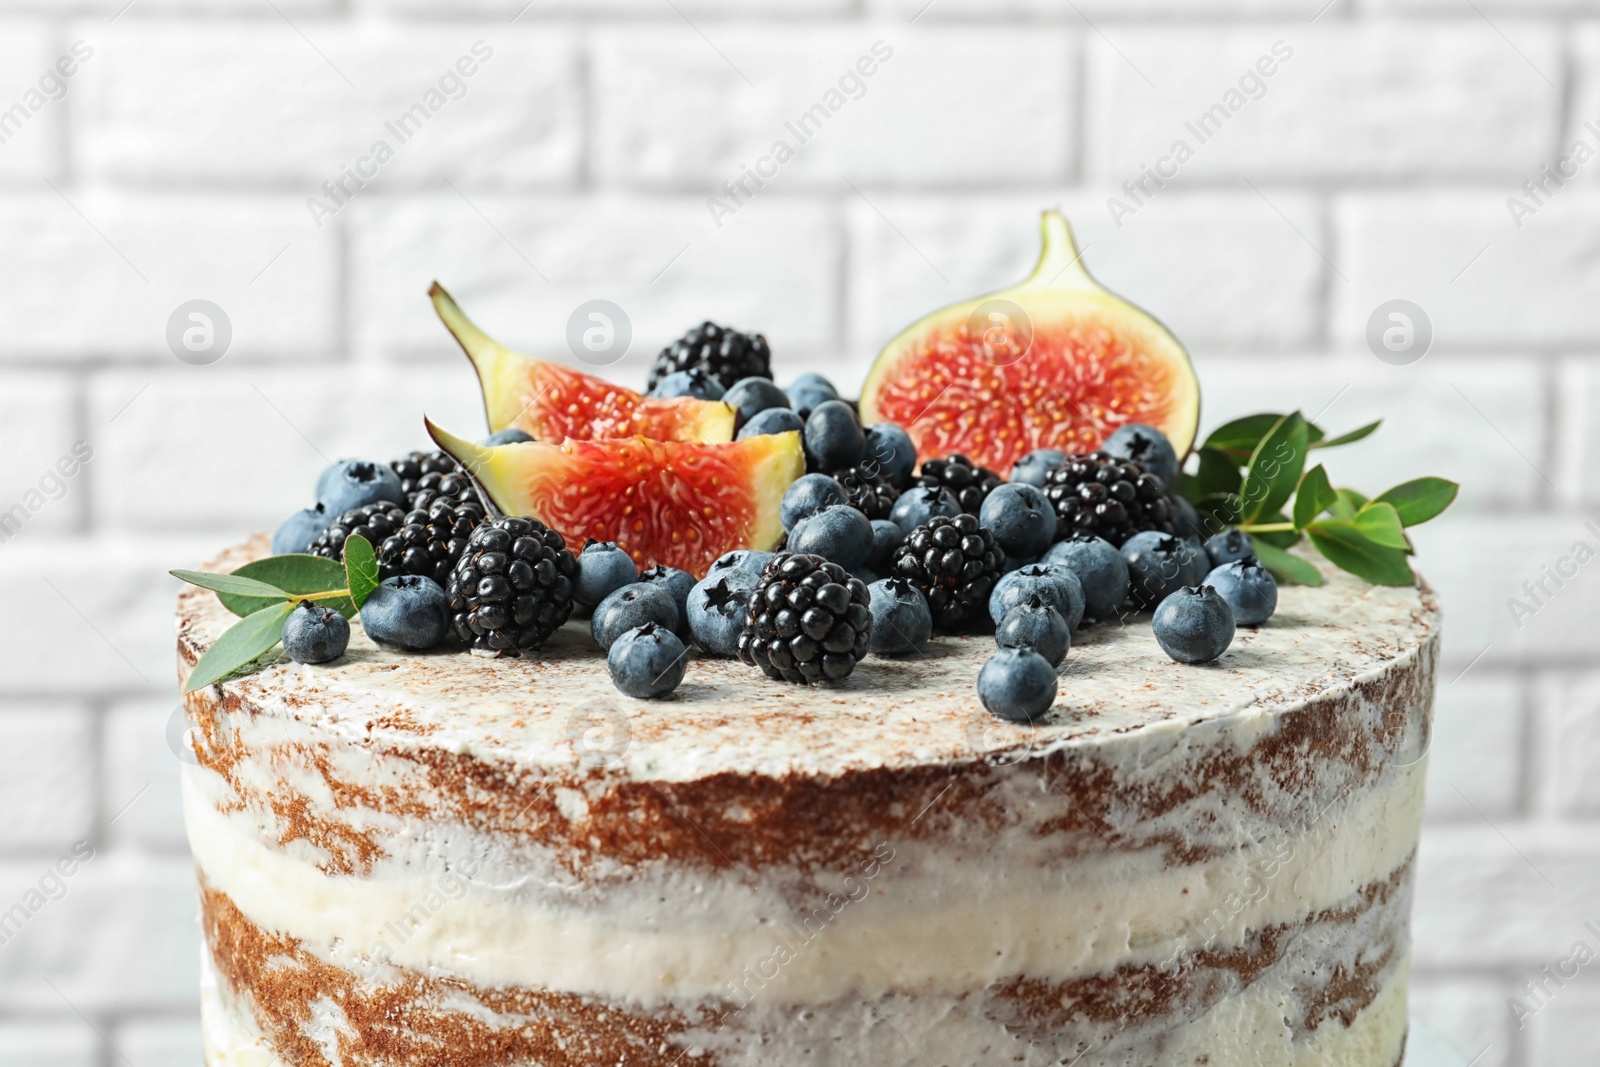 Photo of Delicious homemade cake with fresh berries near brick wall, closeup